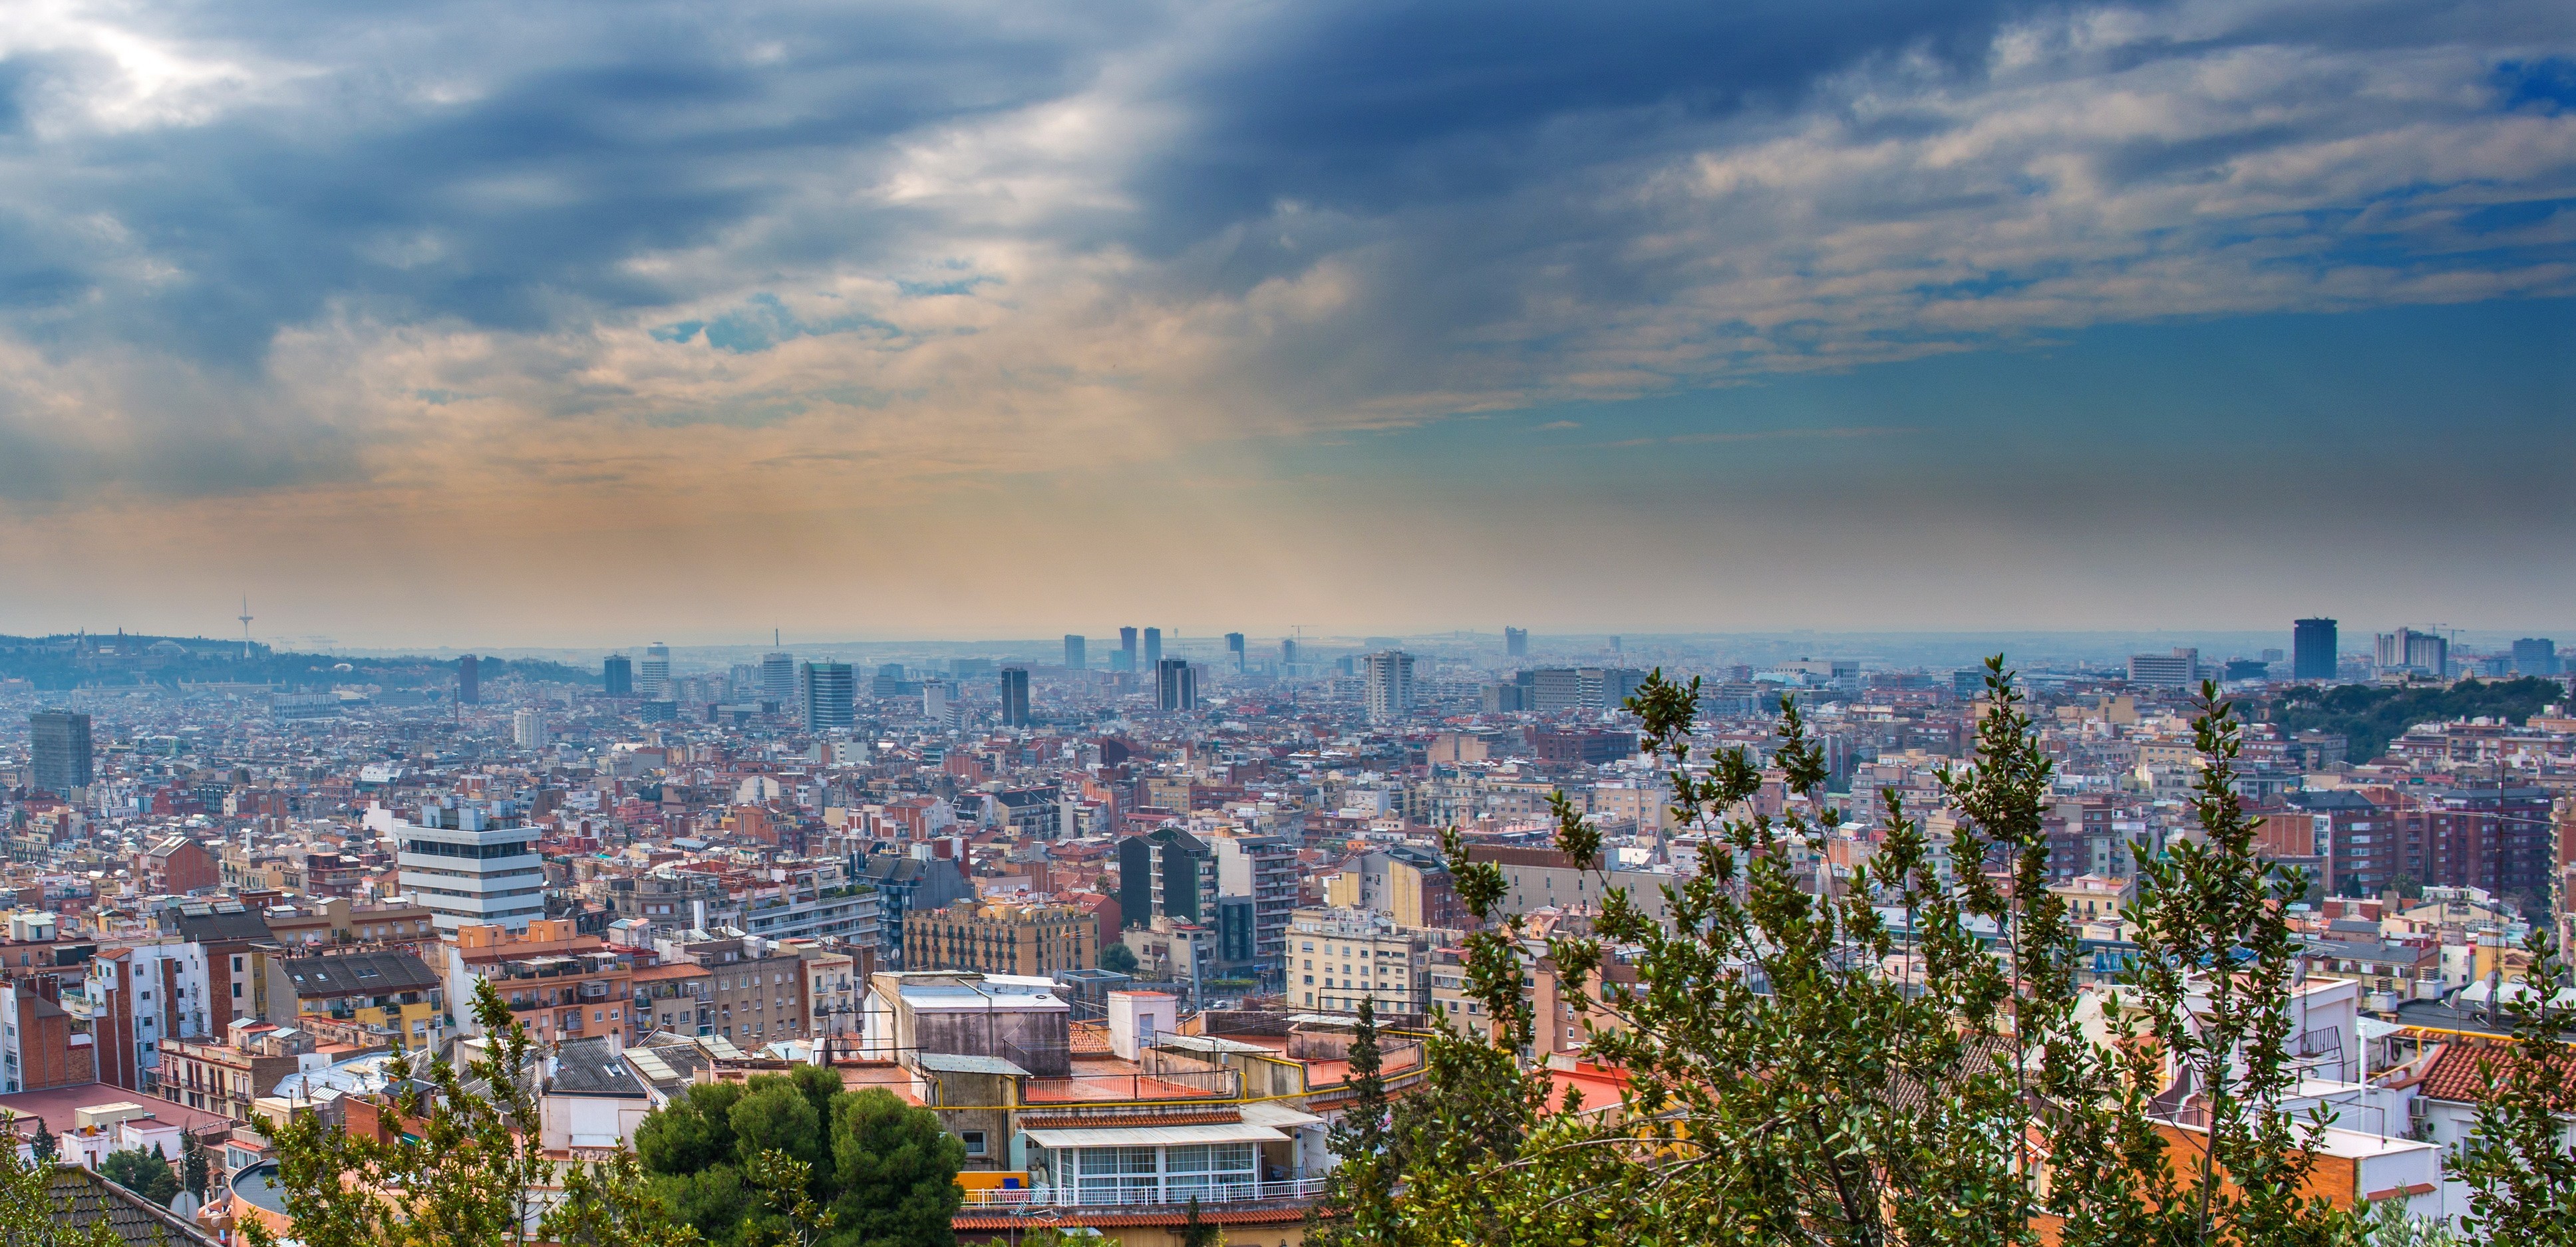 10+ Barcelona HD Wallpapers and Backgrounds